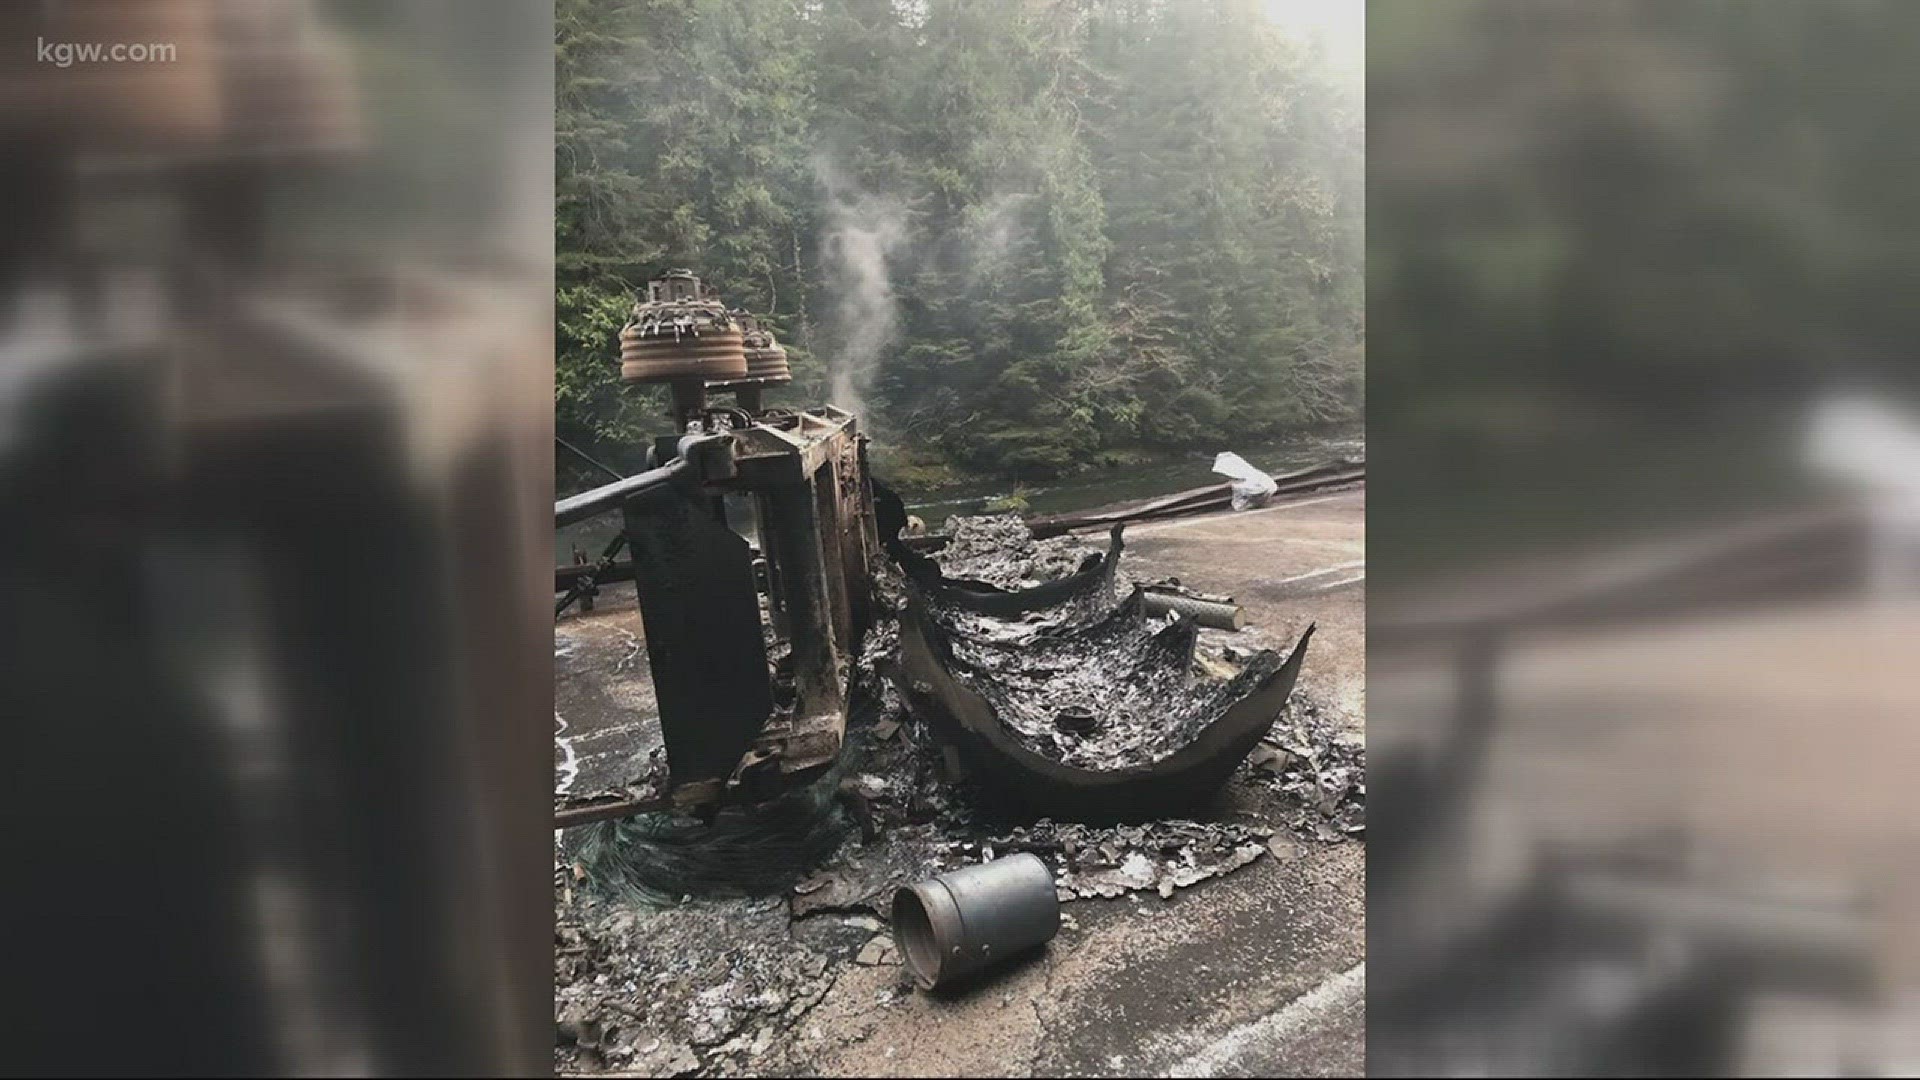 A Bend man was killed in a rollover truck crash that spilled fuel into the North Santiam River.